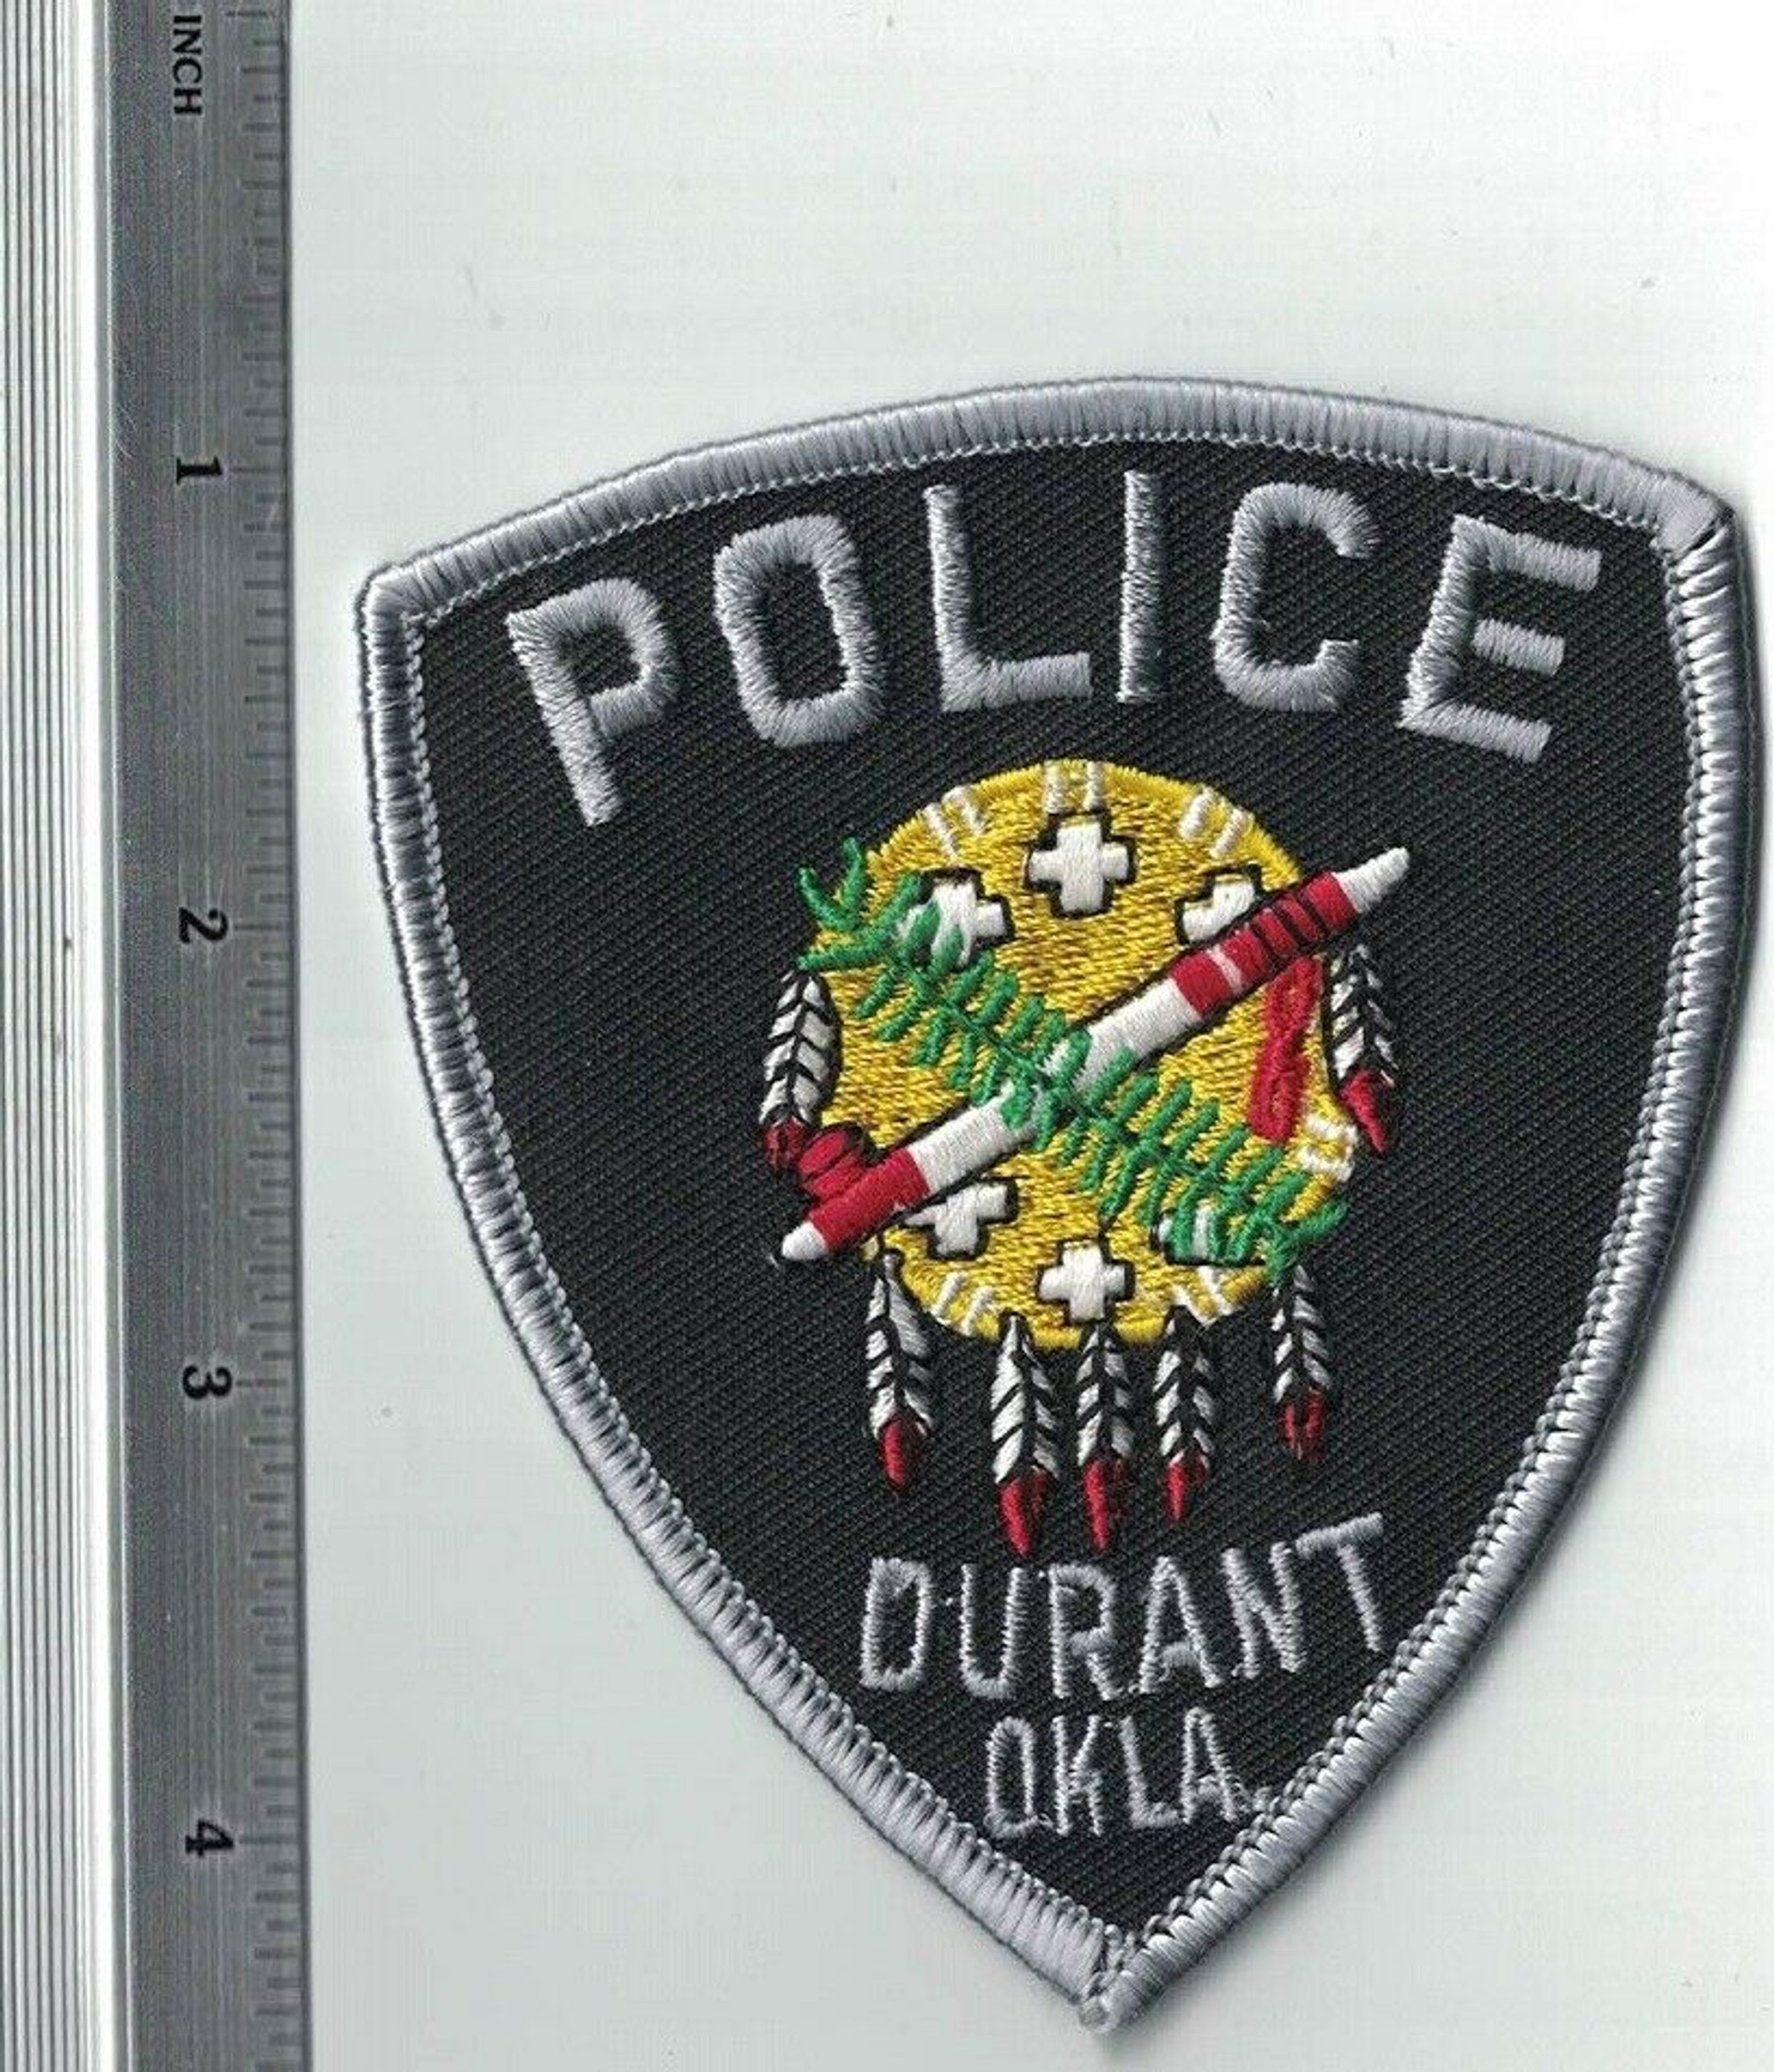 Durant OK Police Patch